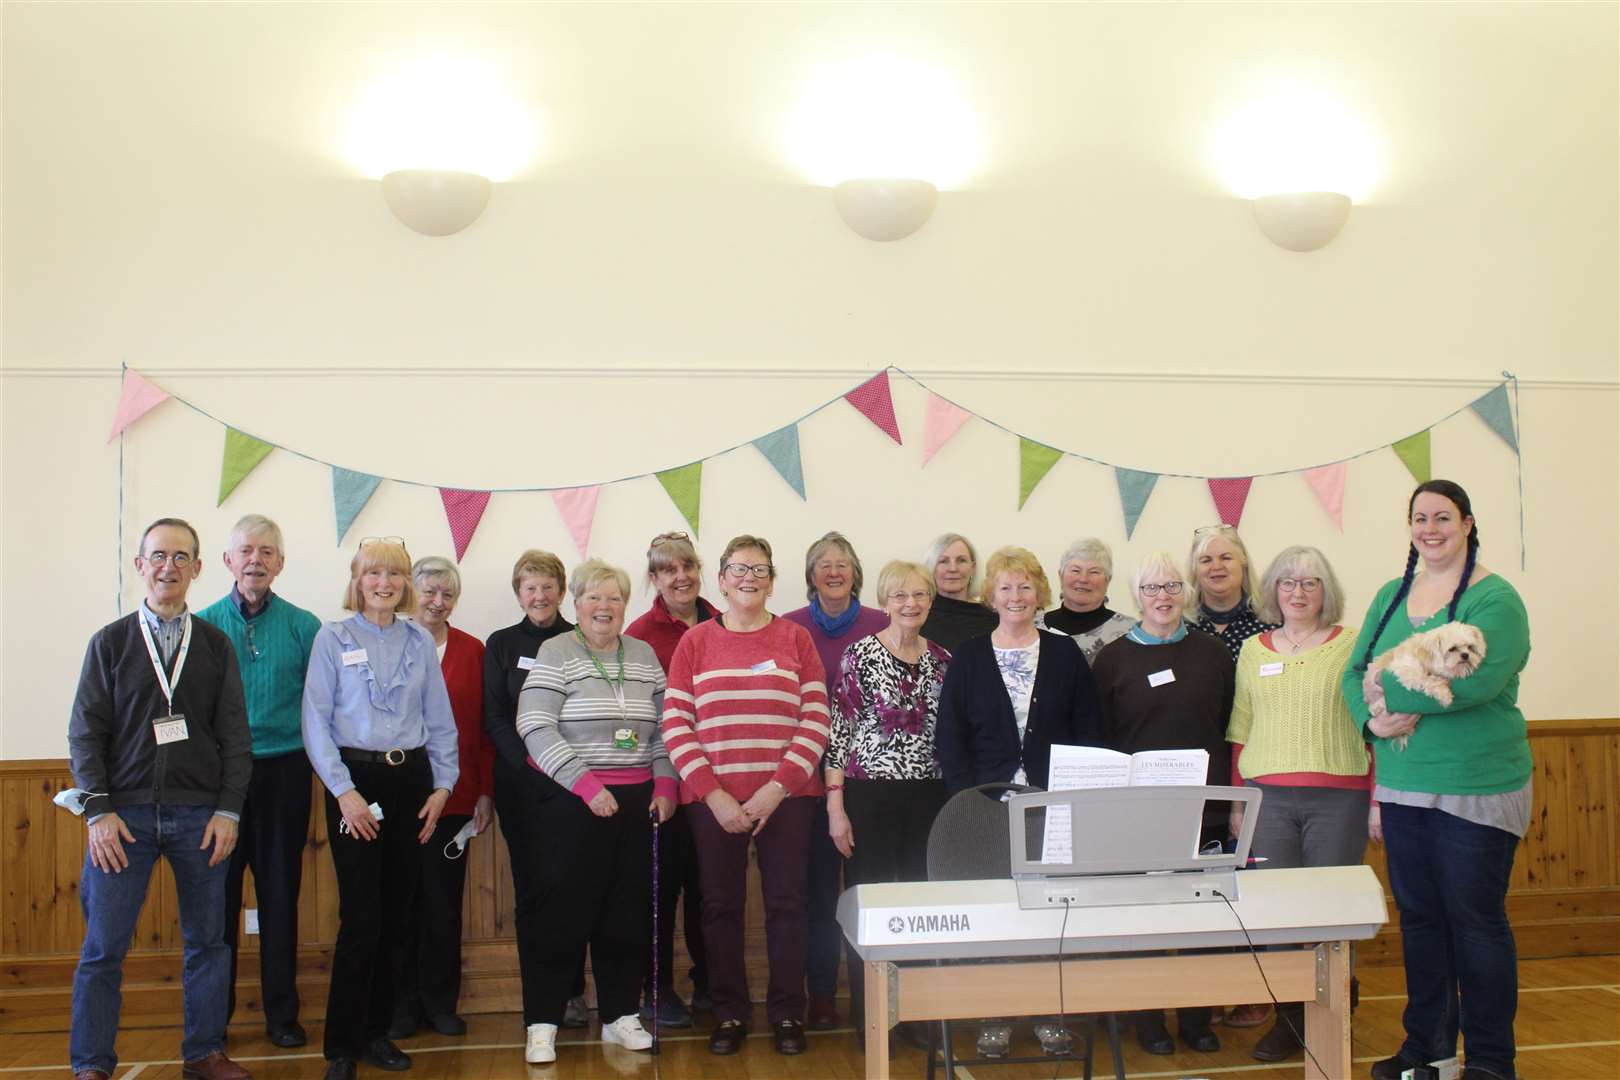 Spectrum Singers Sunday meeting in Kemnay church centre hall with their new musical director Faith Ockwell (right) and Teddy. Picture: Griselda McGregor